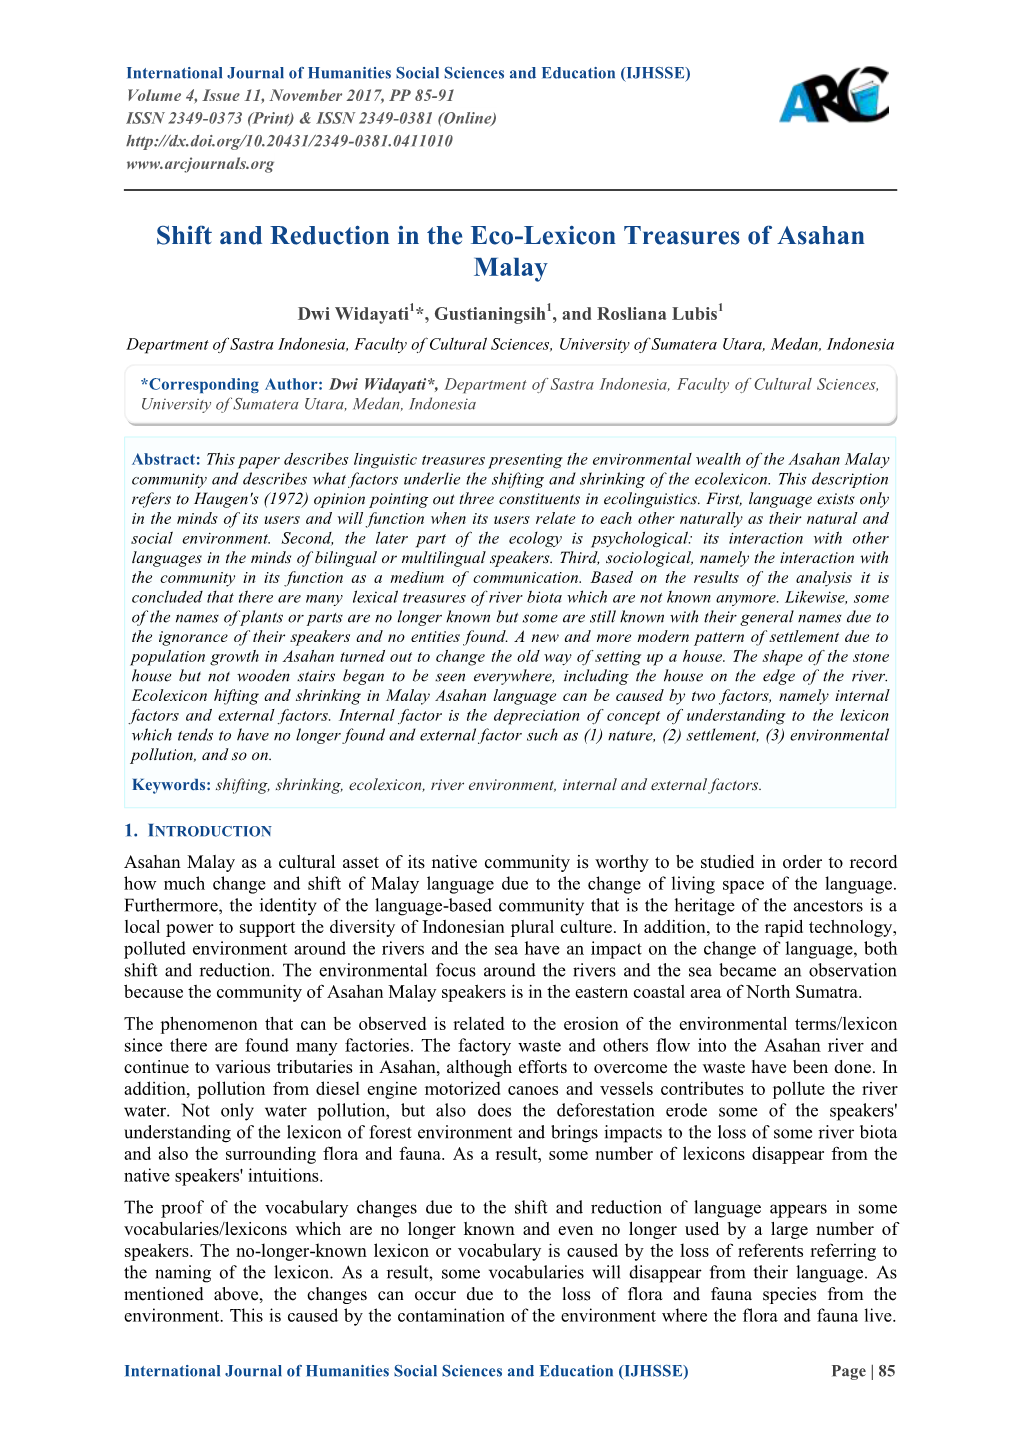 Shift and Reduction in the Eco-Lexicon Treasures of Asahan Malay